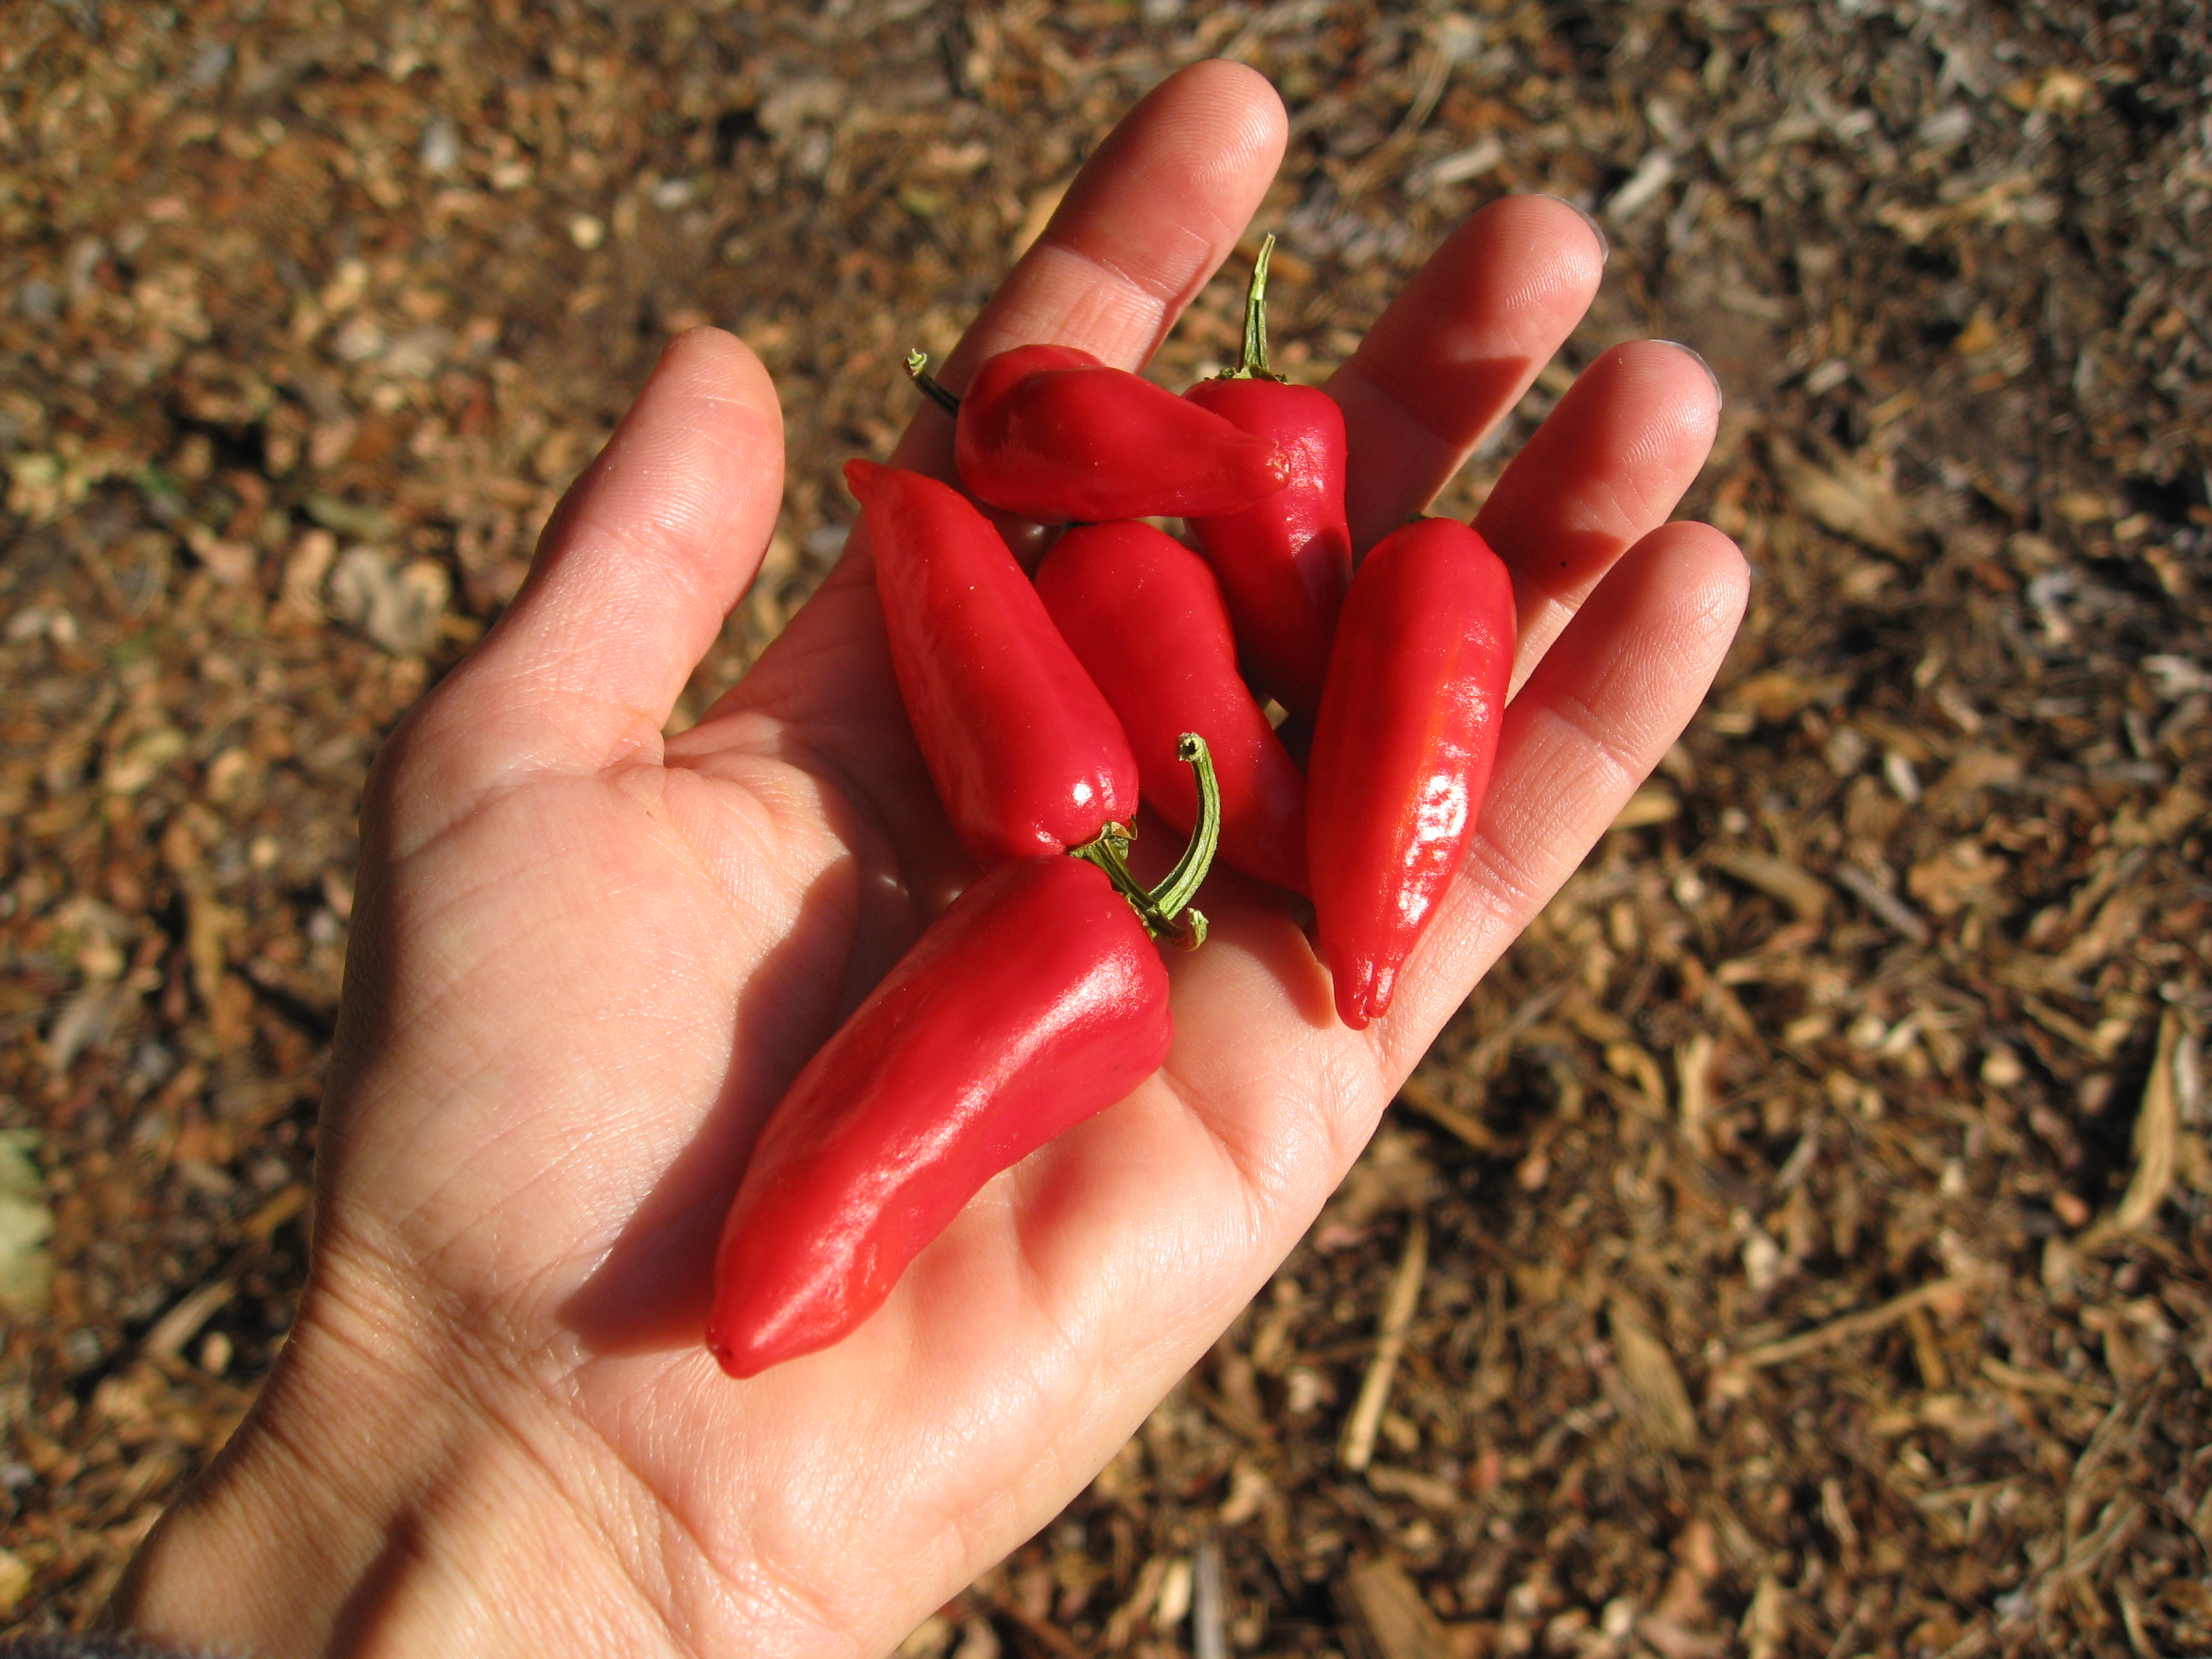 Bright red, our fish peppers aren't too hot. 